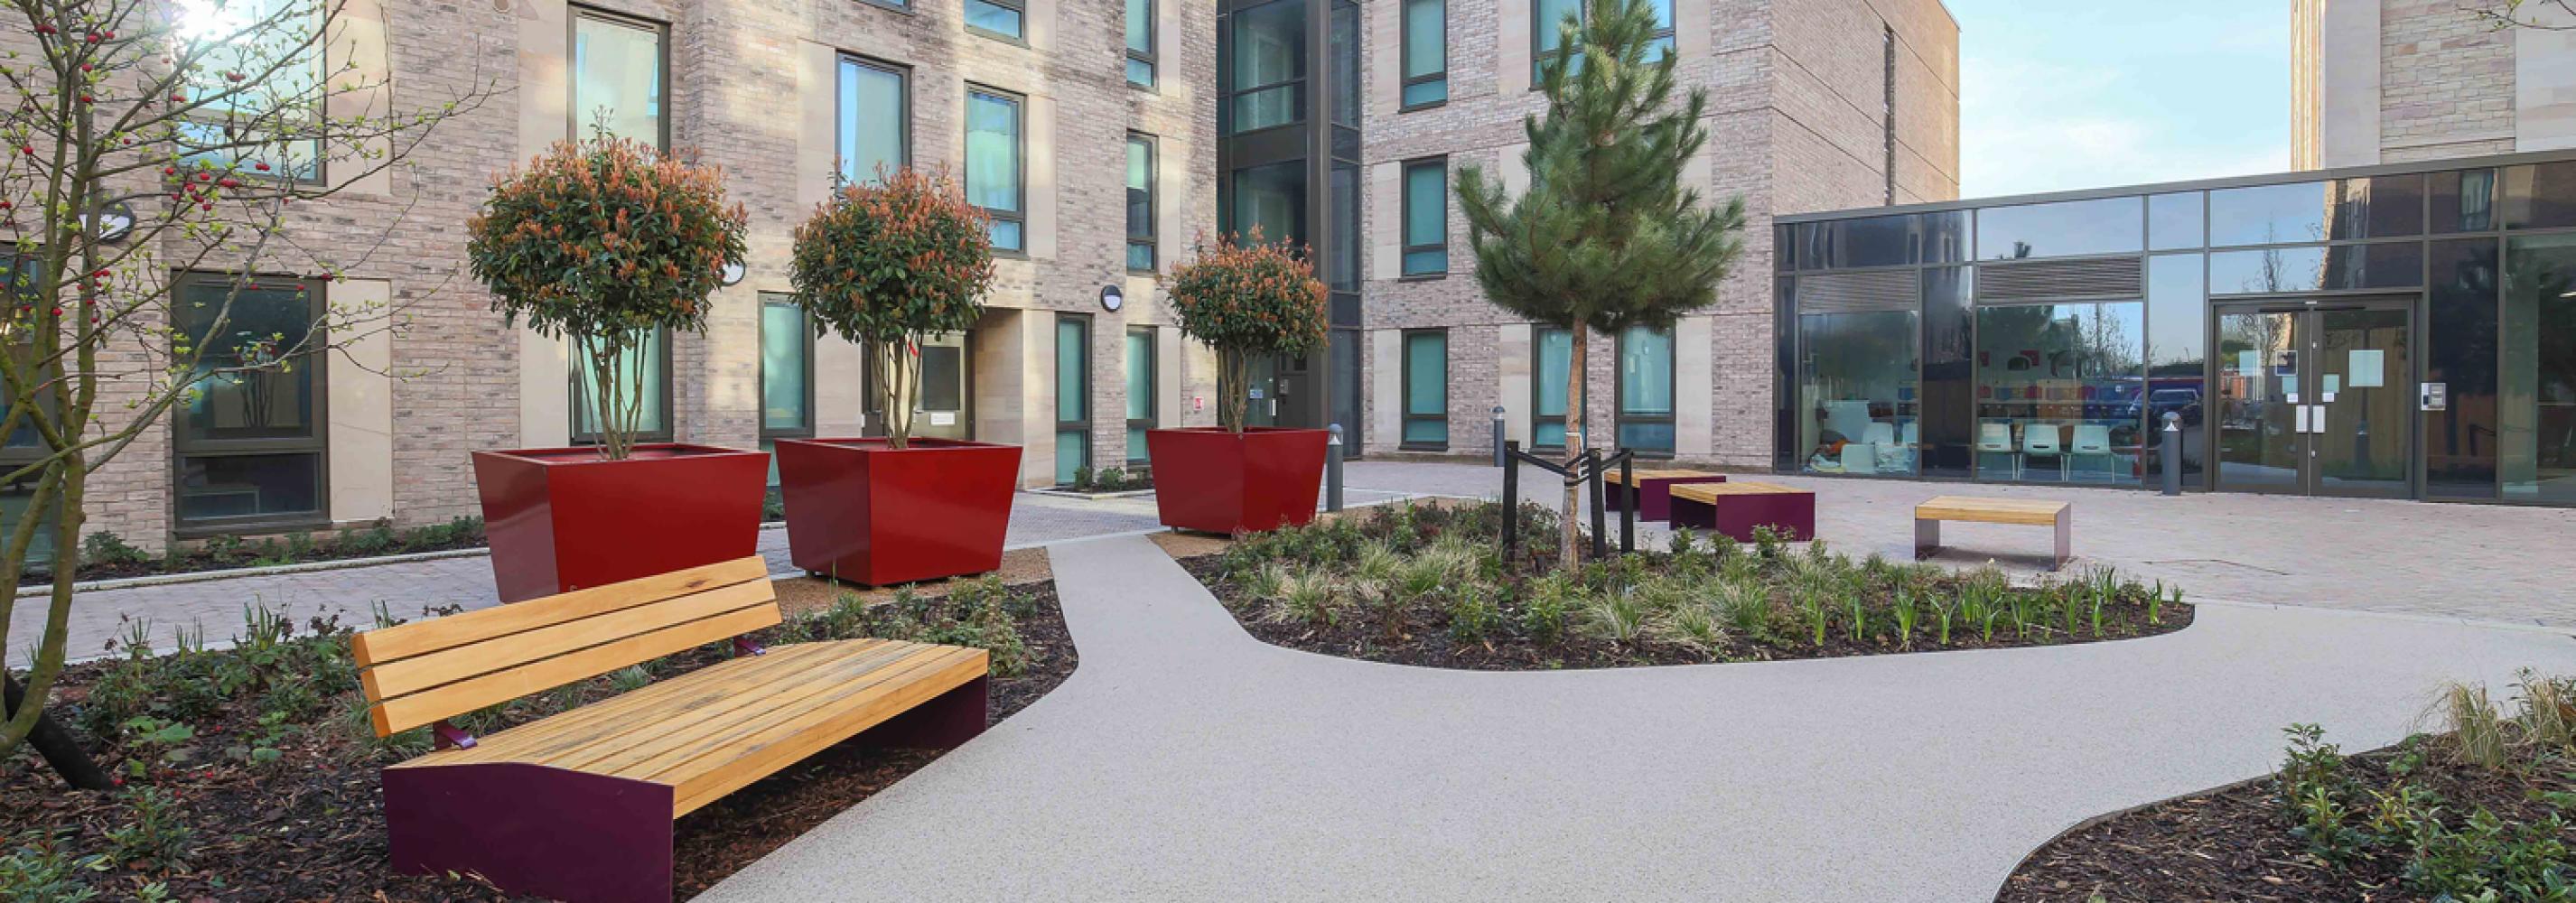 Outdoor area, exterior image of building, benches, trees planted in big red pots, glass doors